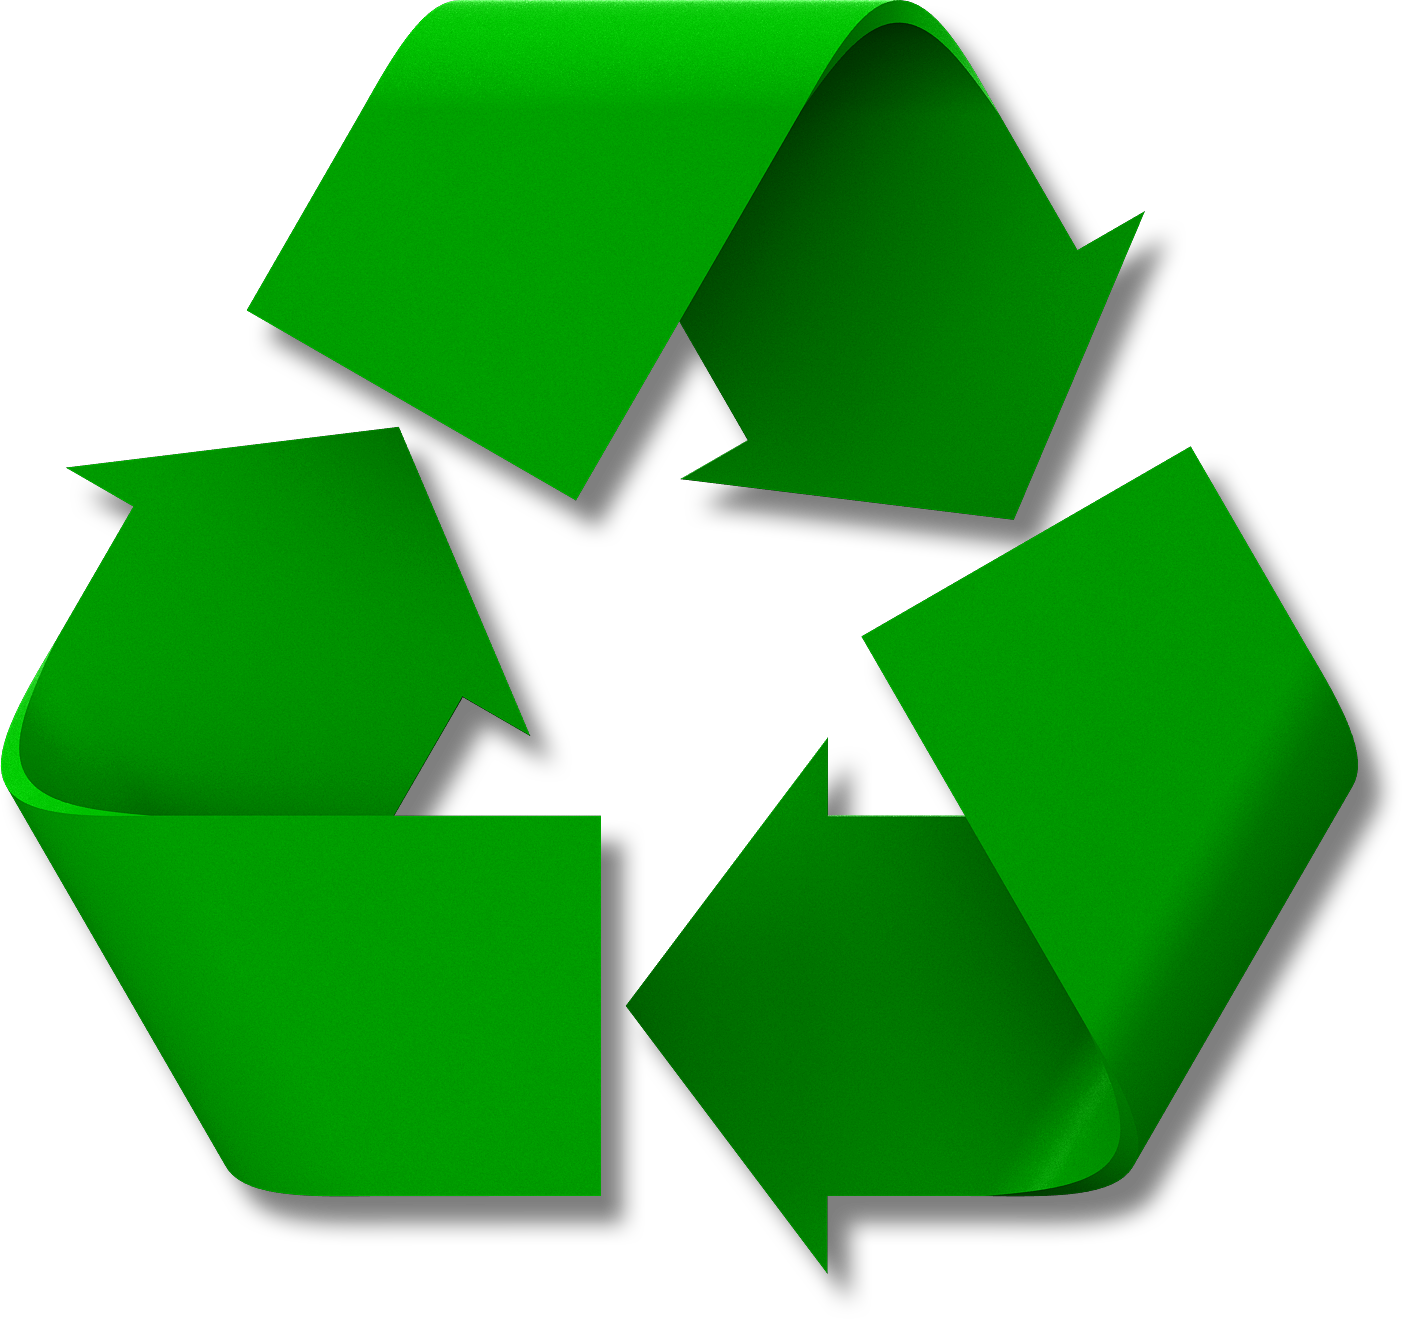 Recycle Sign 09 Free Greenpeace Symbols Wallpaper